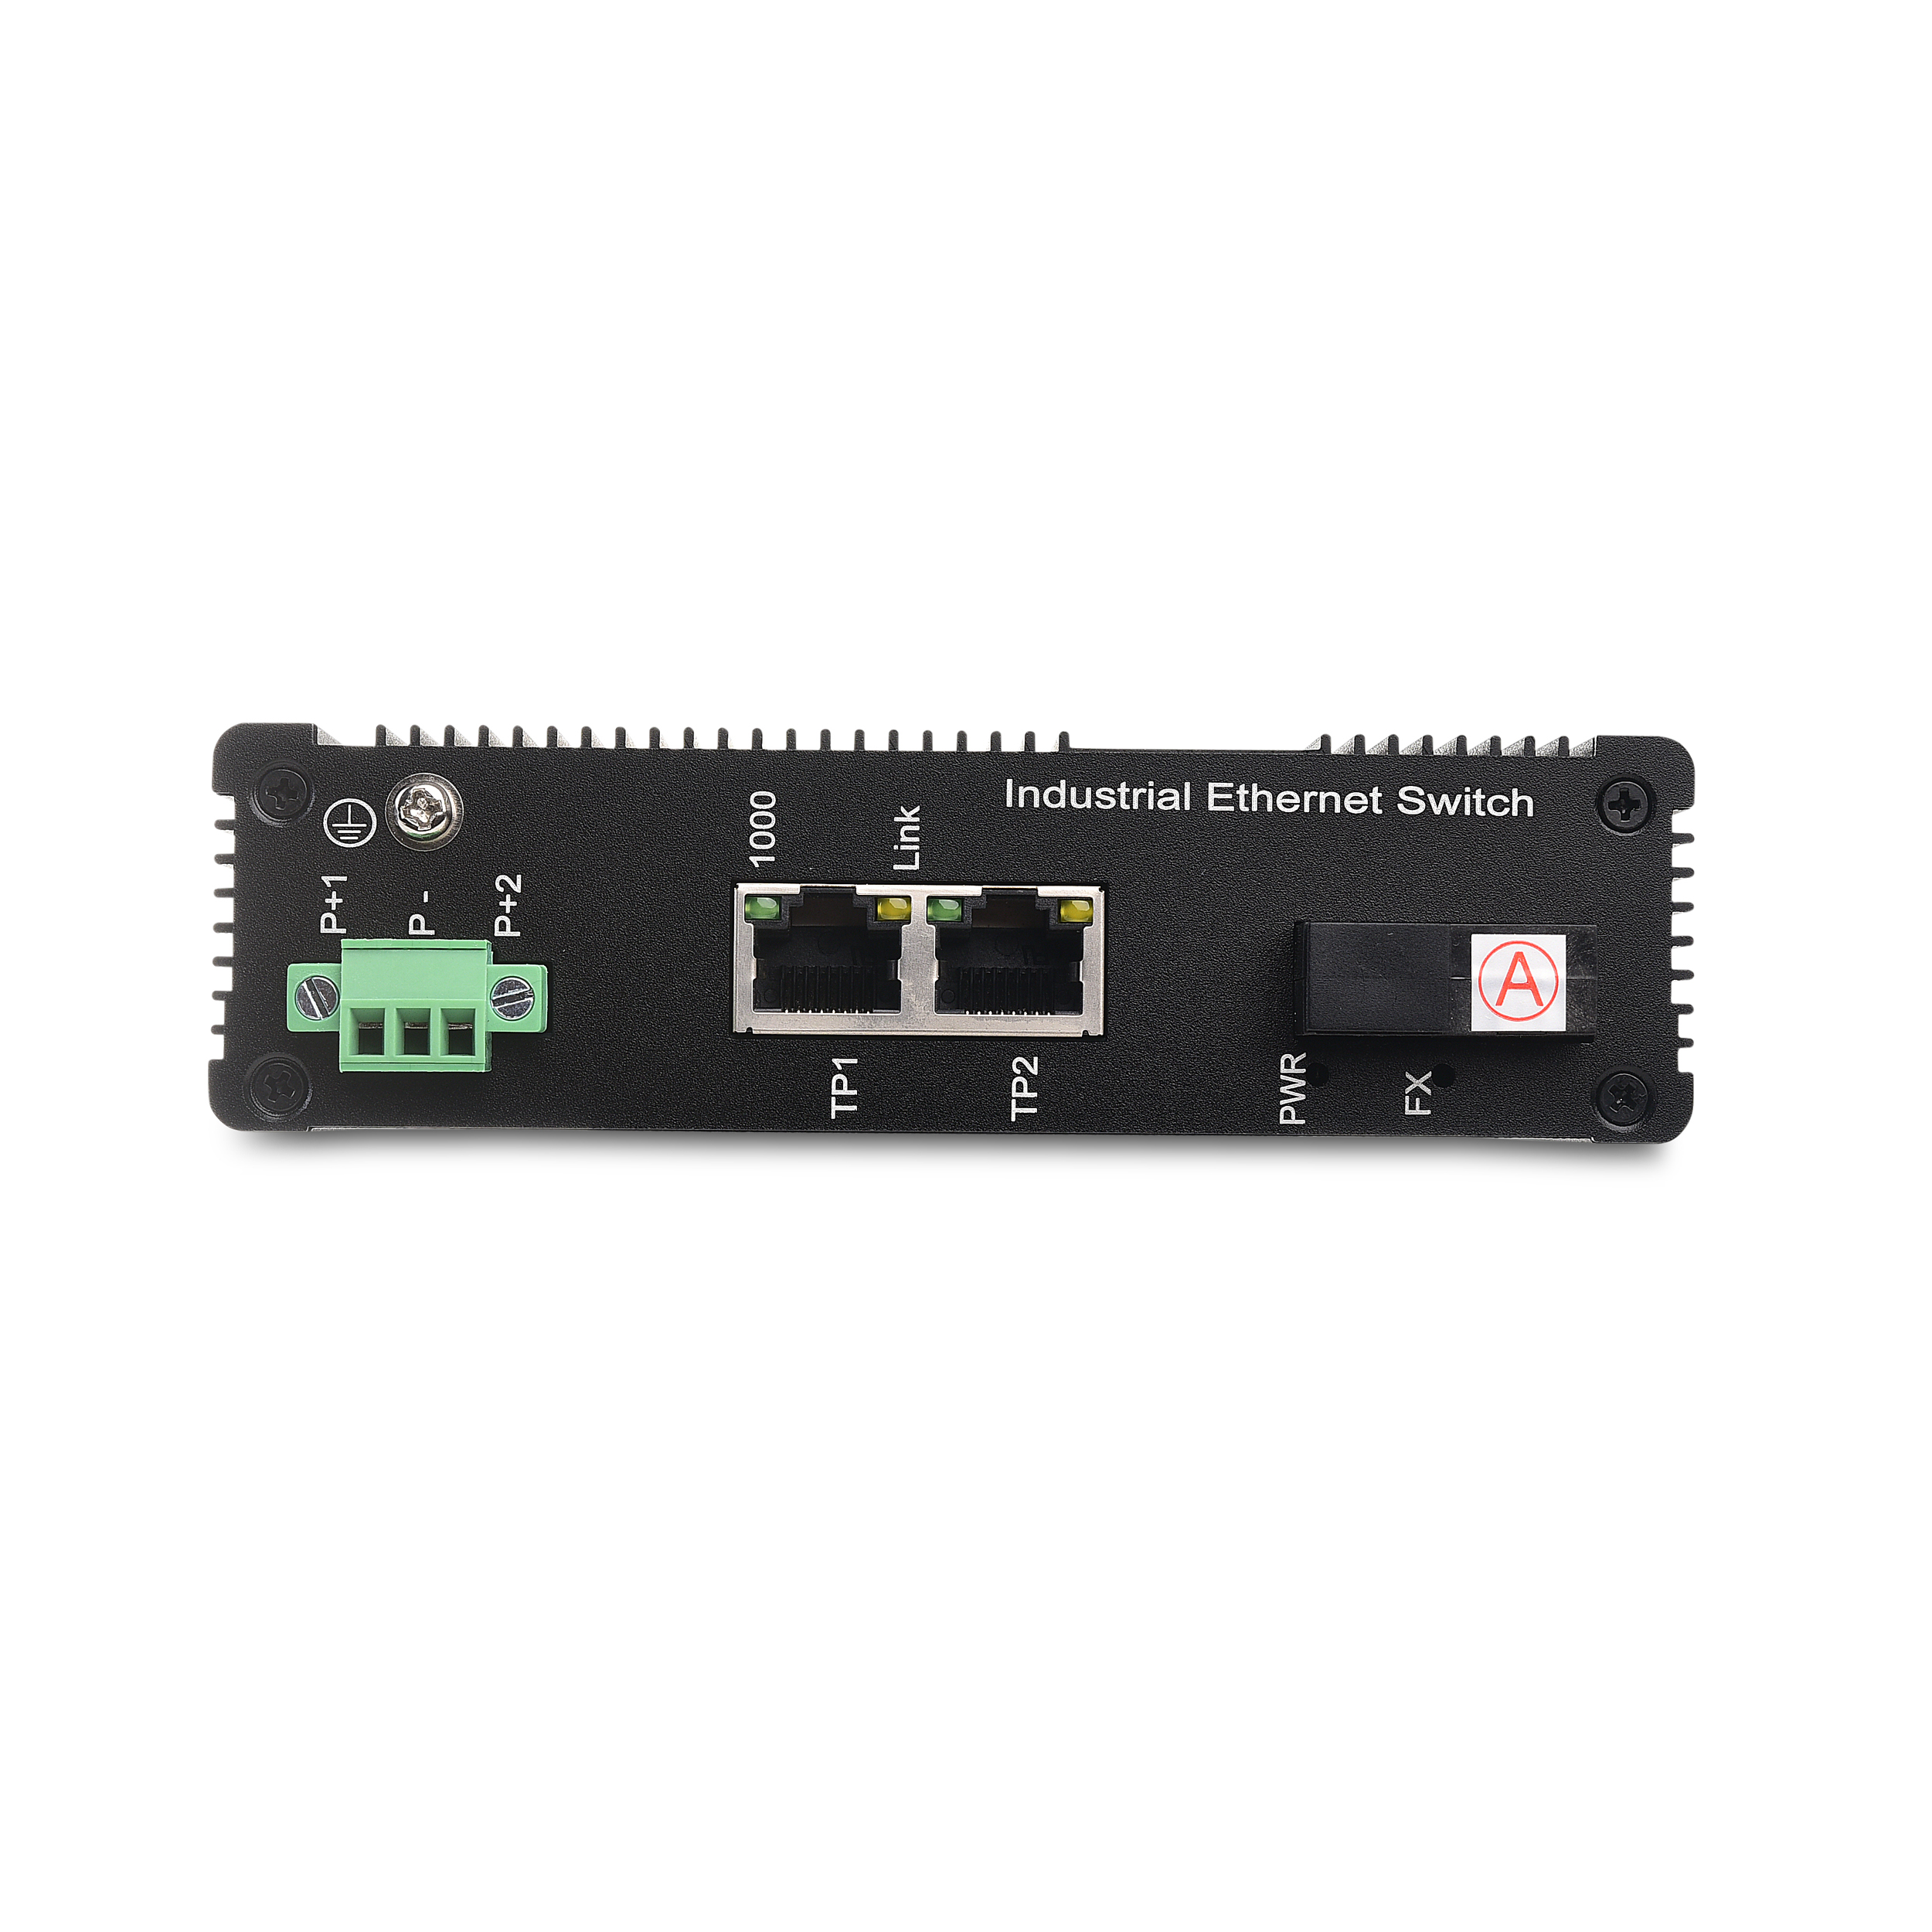 China Wholesale Fiber Optic Poe Ethernet Switch Suppliers Factories - 2 10/100/1000TX and 1 1000FX | Industrial Media Converter JHA-IG12H – JHA